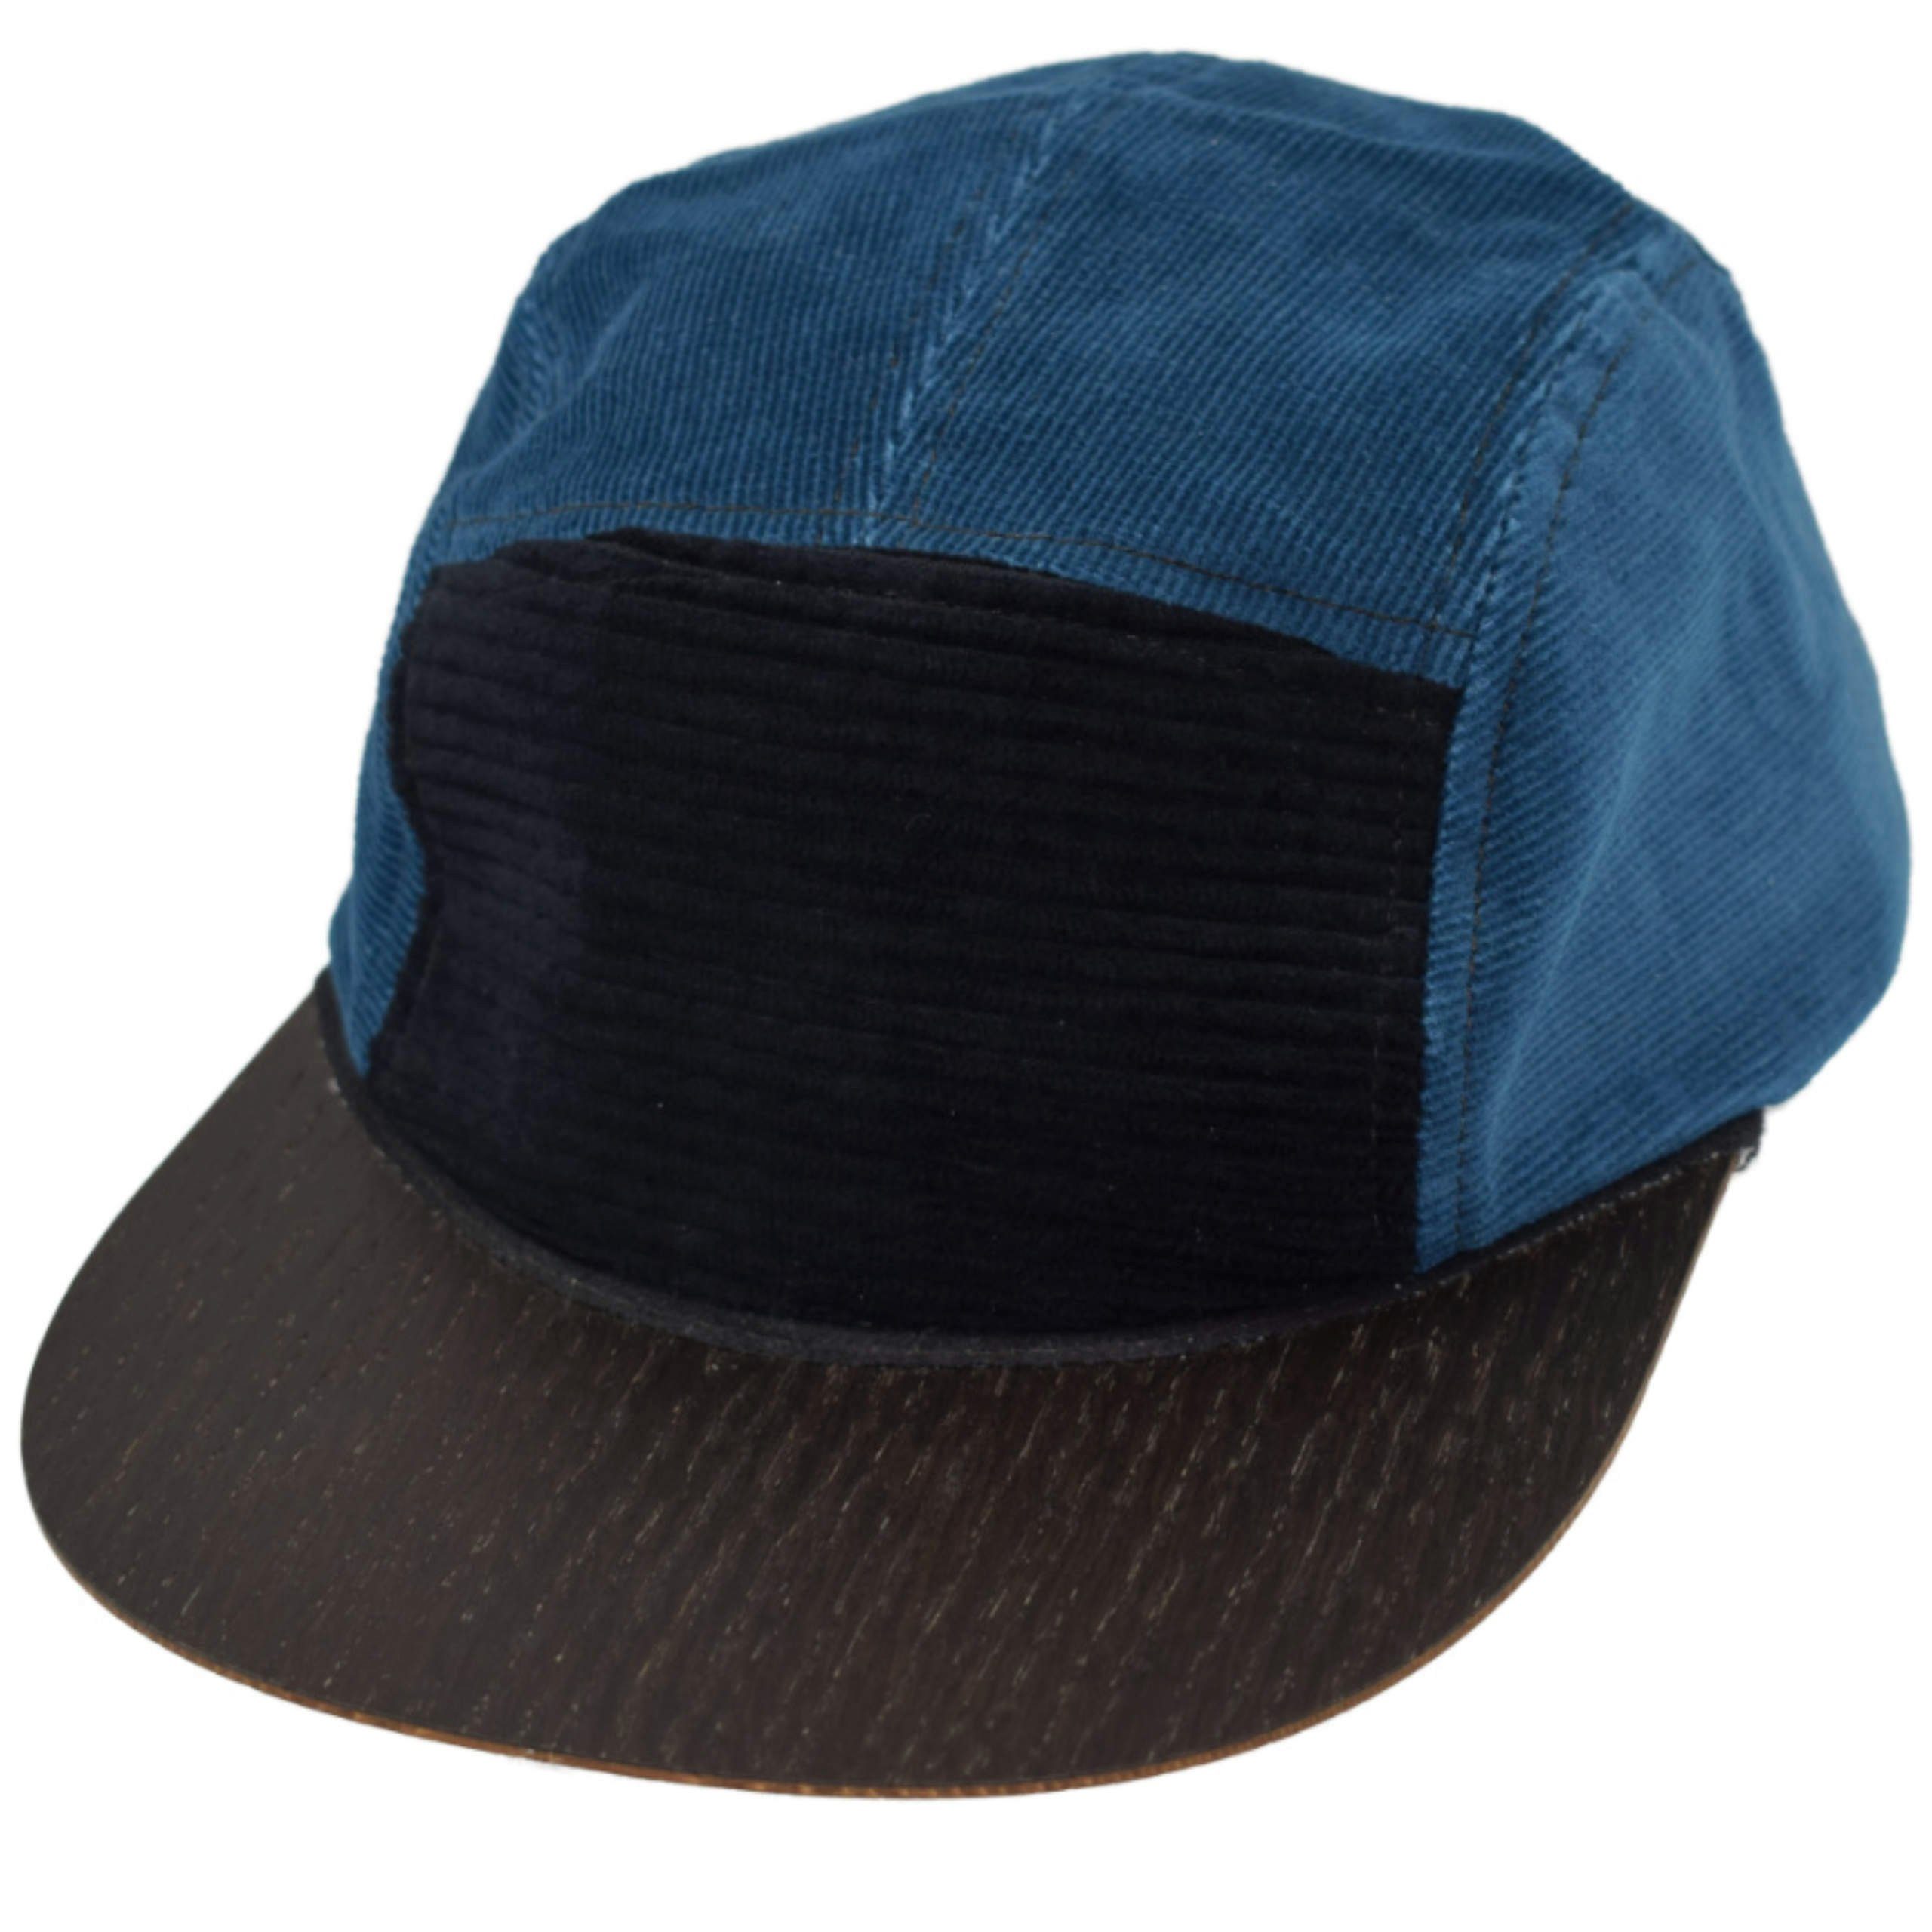 Lou-i Snapback Cap Cord Holzschild in Holzschild Blau mit Germany Made Cap